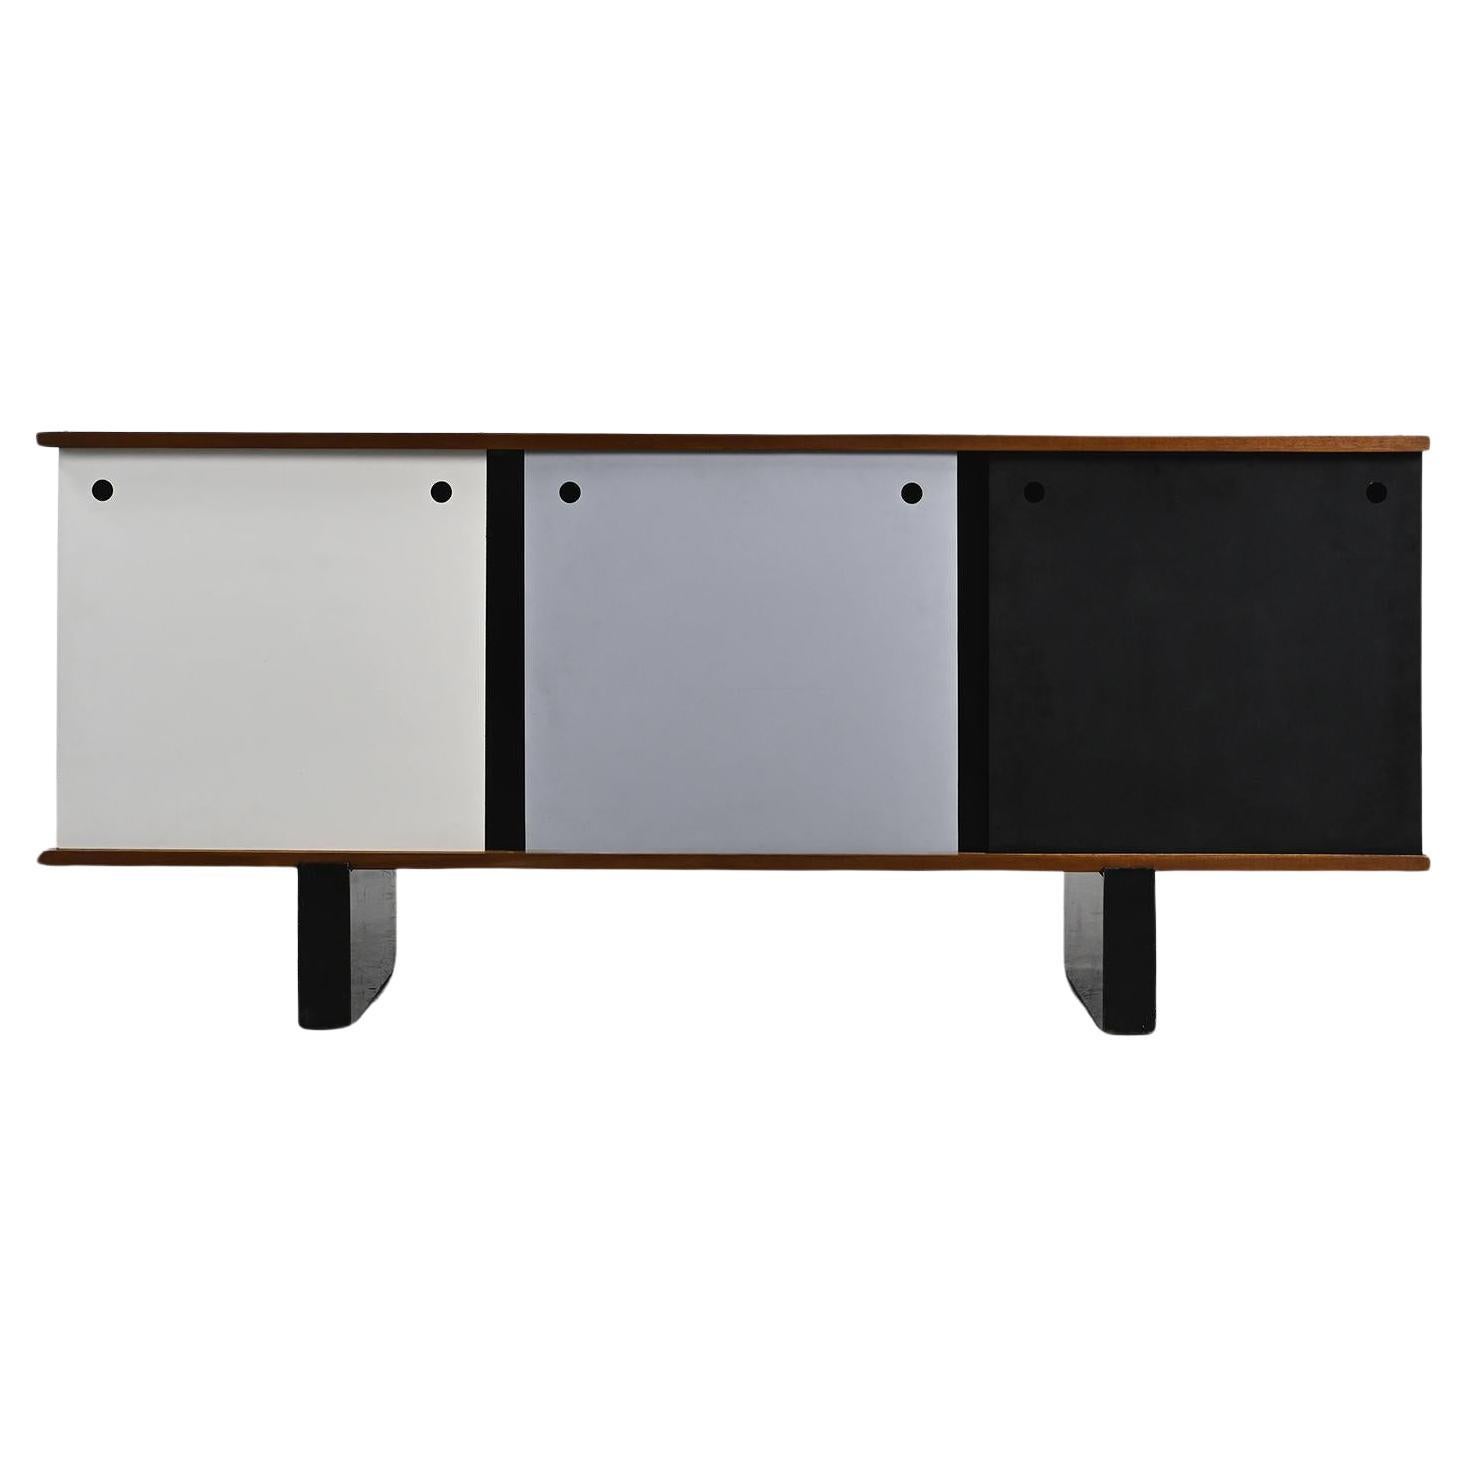 Charlotte Perriand "Bloc" Sideboard with 3 Doors, Cansado, circa 1960. 